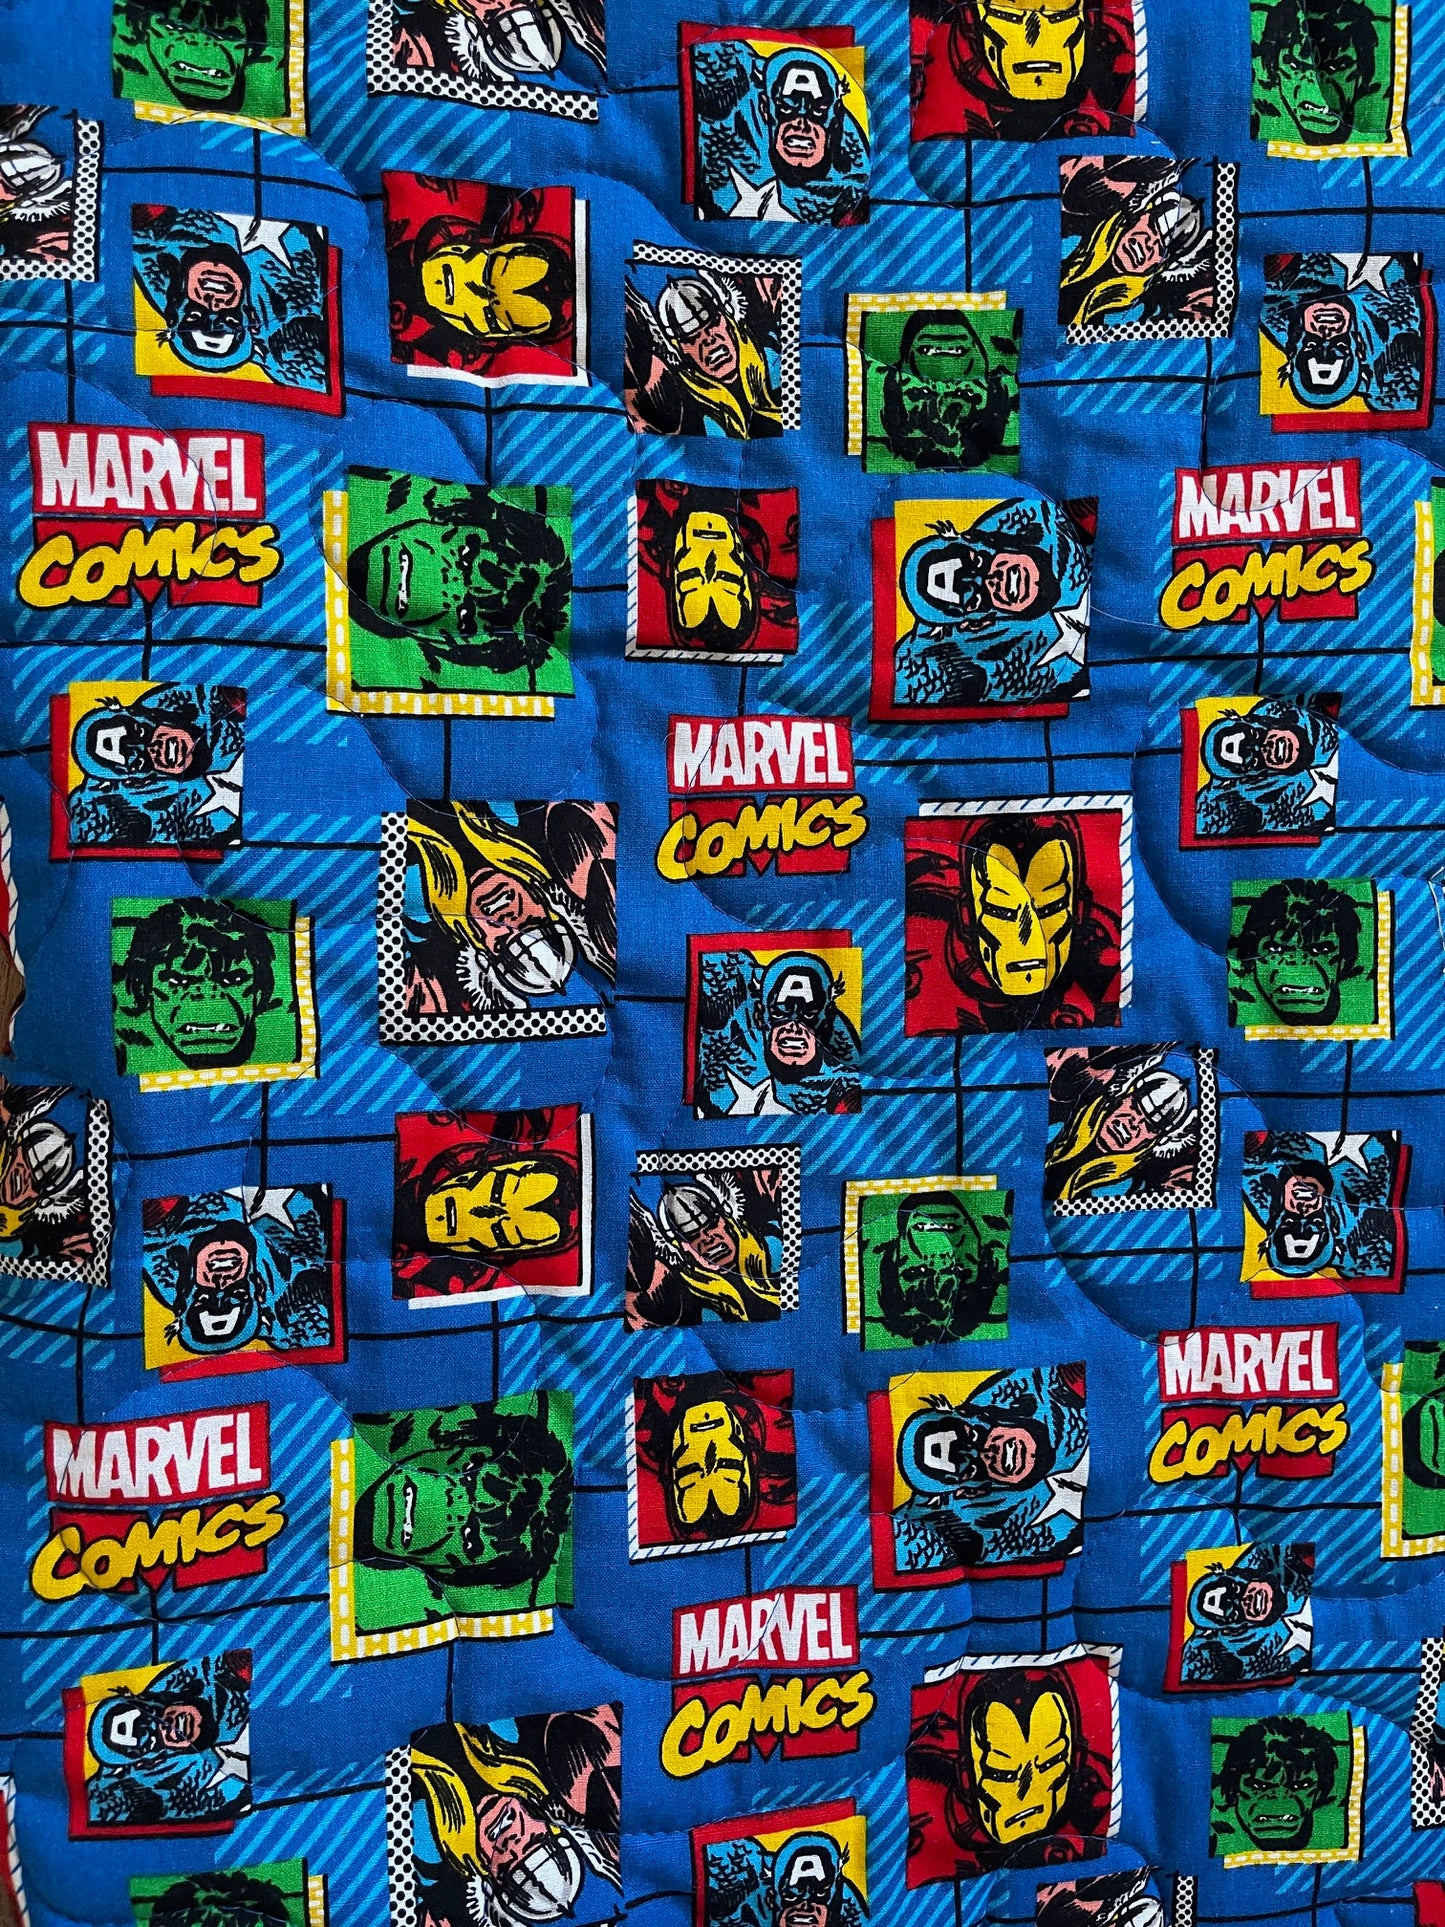 MARVEL SUPERHEROES AVENGERS ASSEMBLE BLACK WIDOW, HAWKEYE, THOR, THE HULK, IRON MAN, CAPTAIN AMERICA Inspired Quilted Blanket